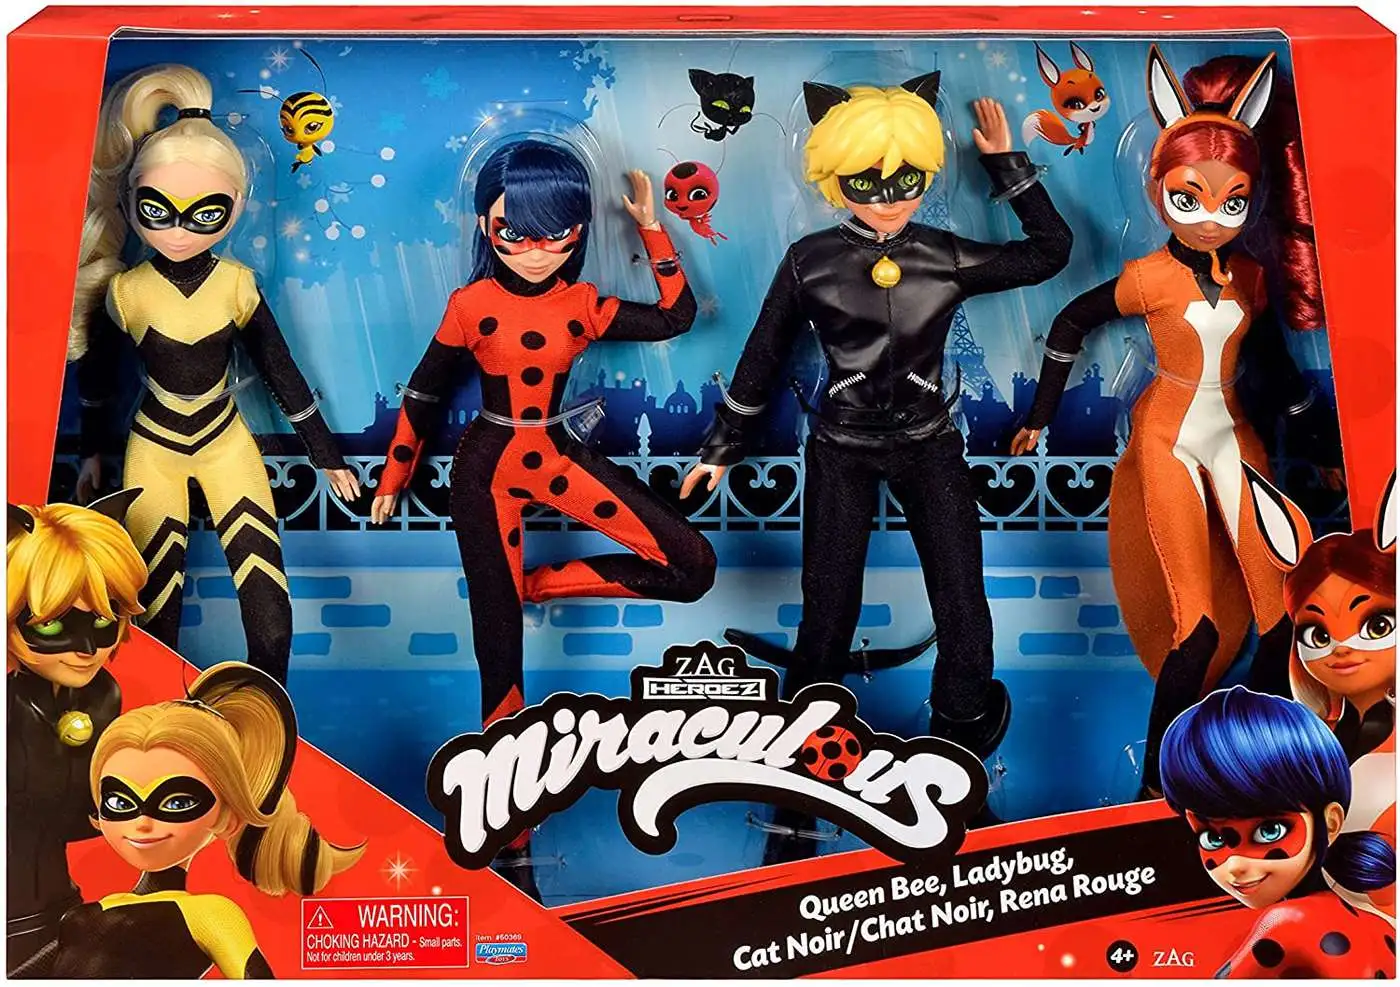 Miraculous Zag Heroez Queen Bee, Ladybug, Cat Noir Rena Rouge 11 Fashion  Doll 4-Pack Playmates - ToyWiz